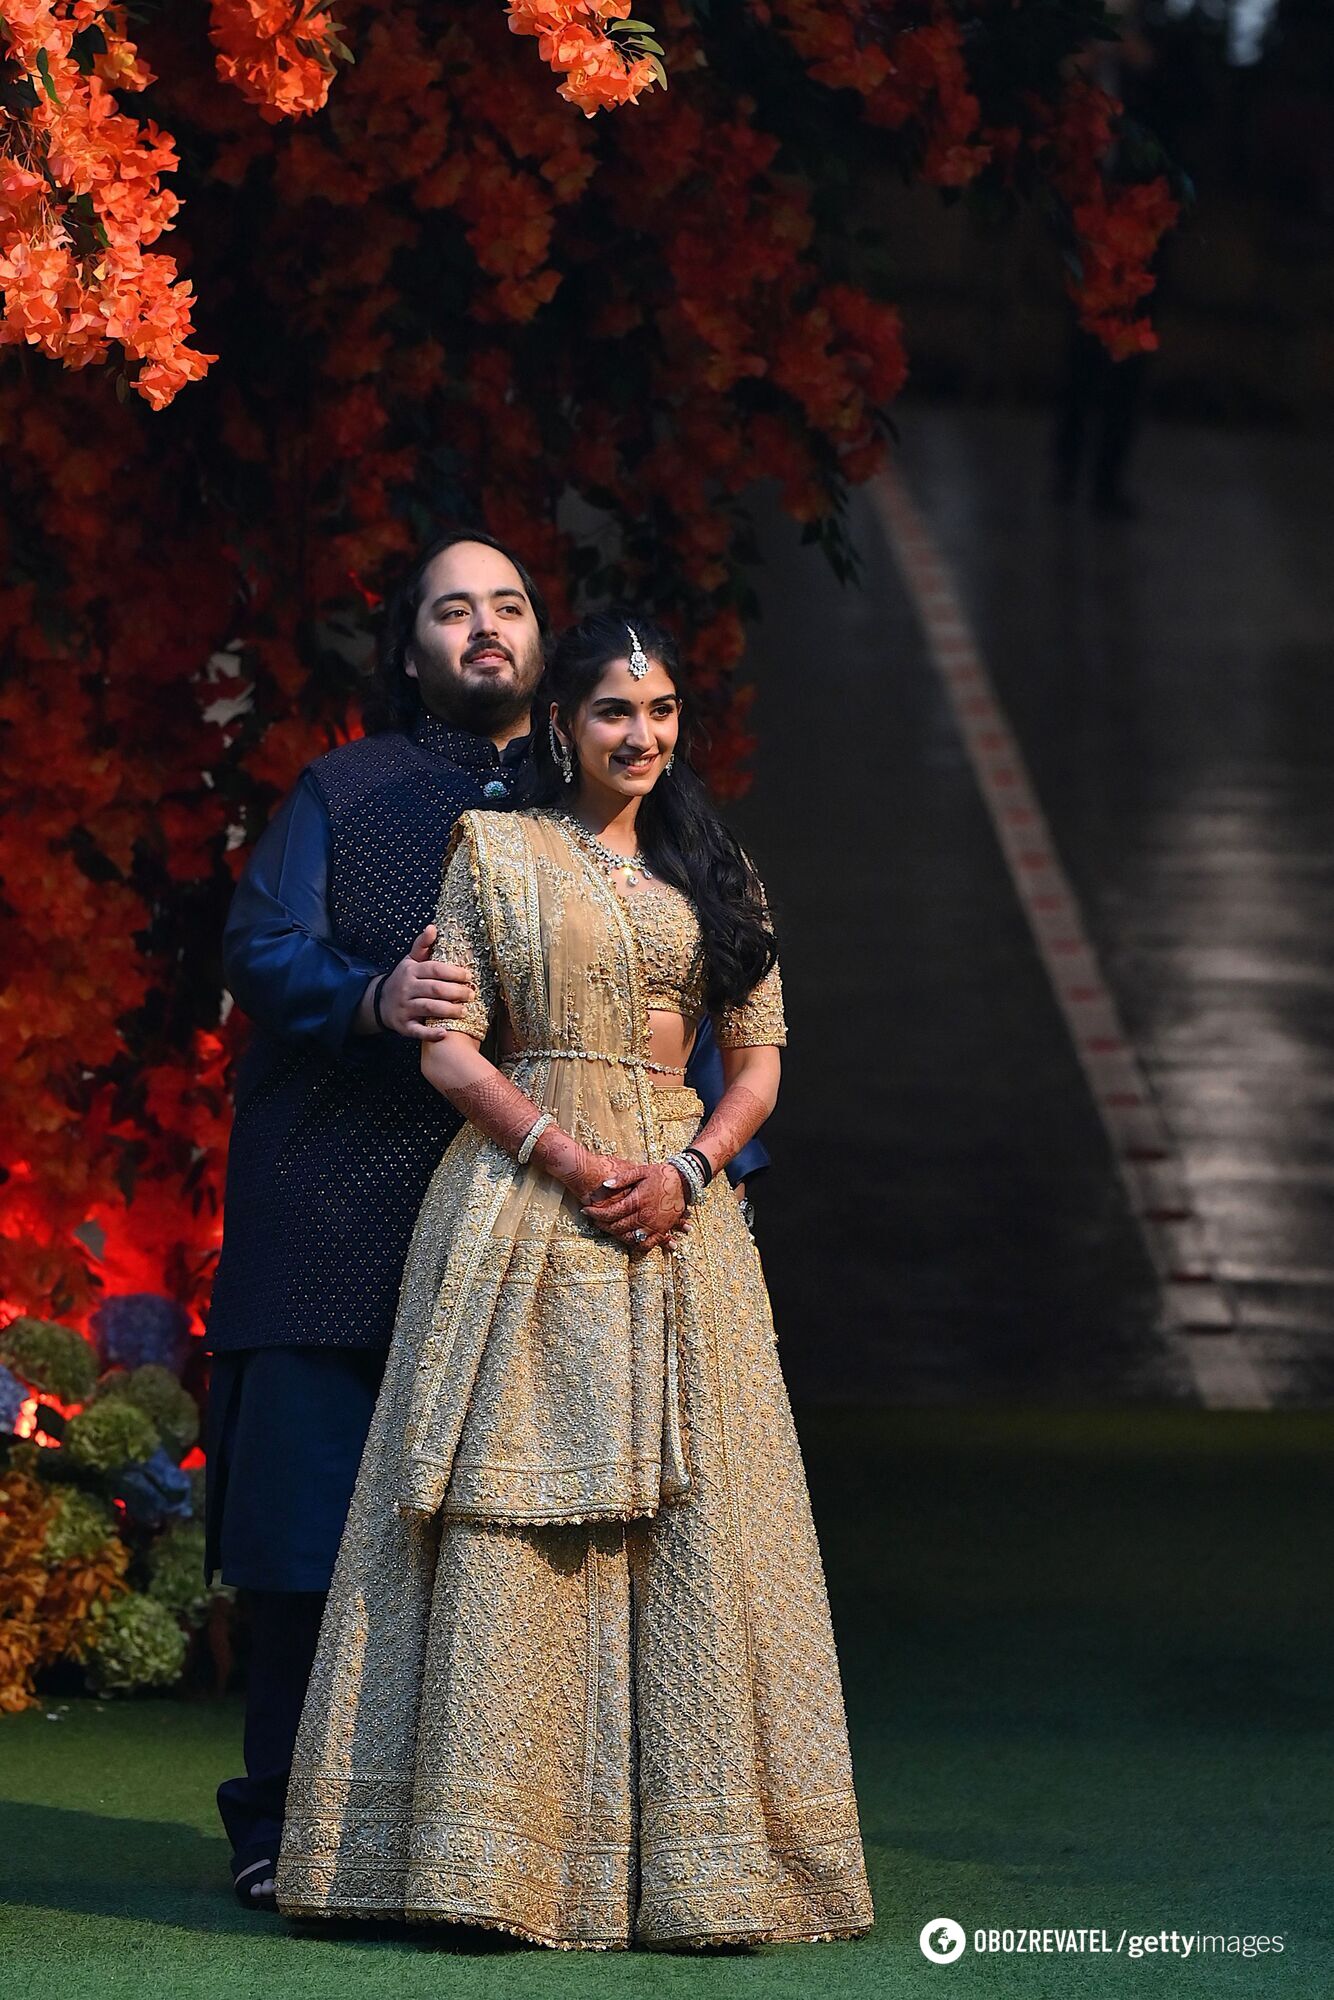 The son of India's richest man, whose fortune is estimated at $118 billion, is getting married. What to expect from the ''wedding of the year''